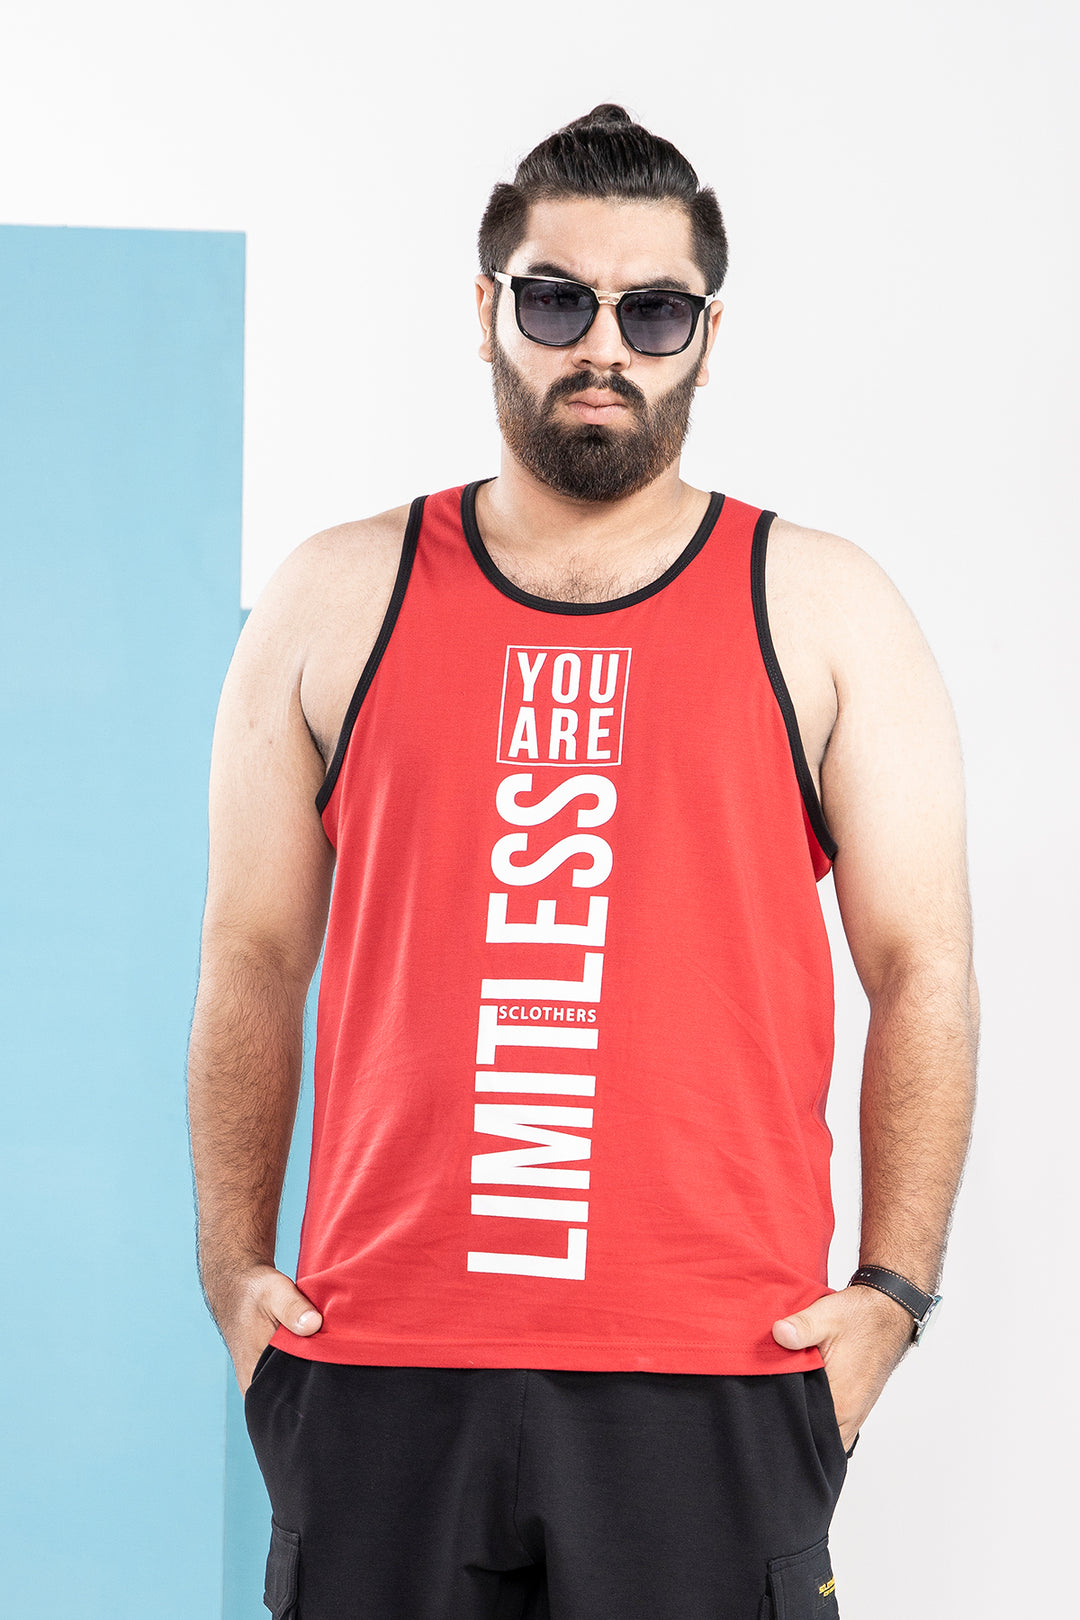 Limitless Red Tank Top (Plus Size) - S21 - MTT006P